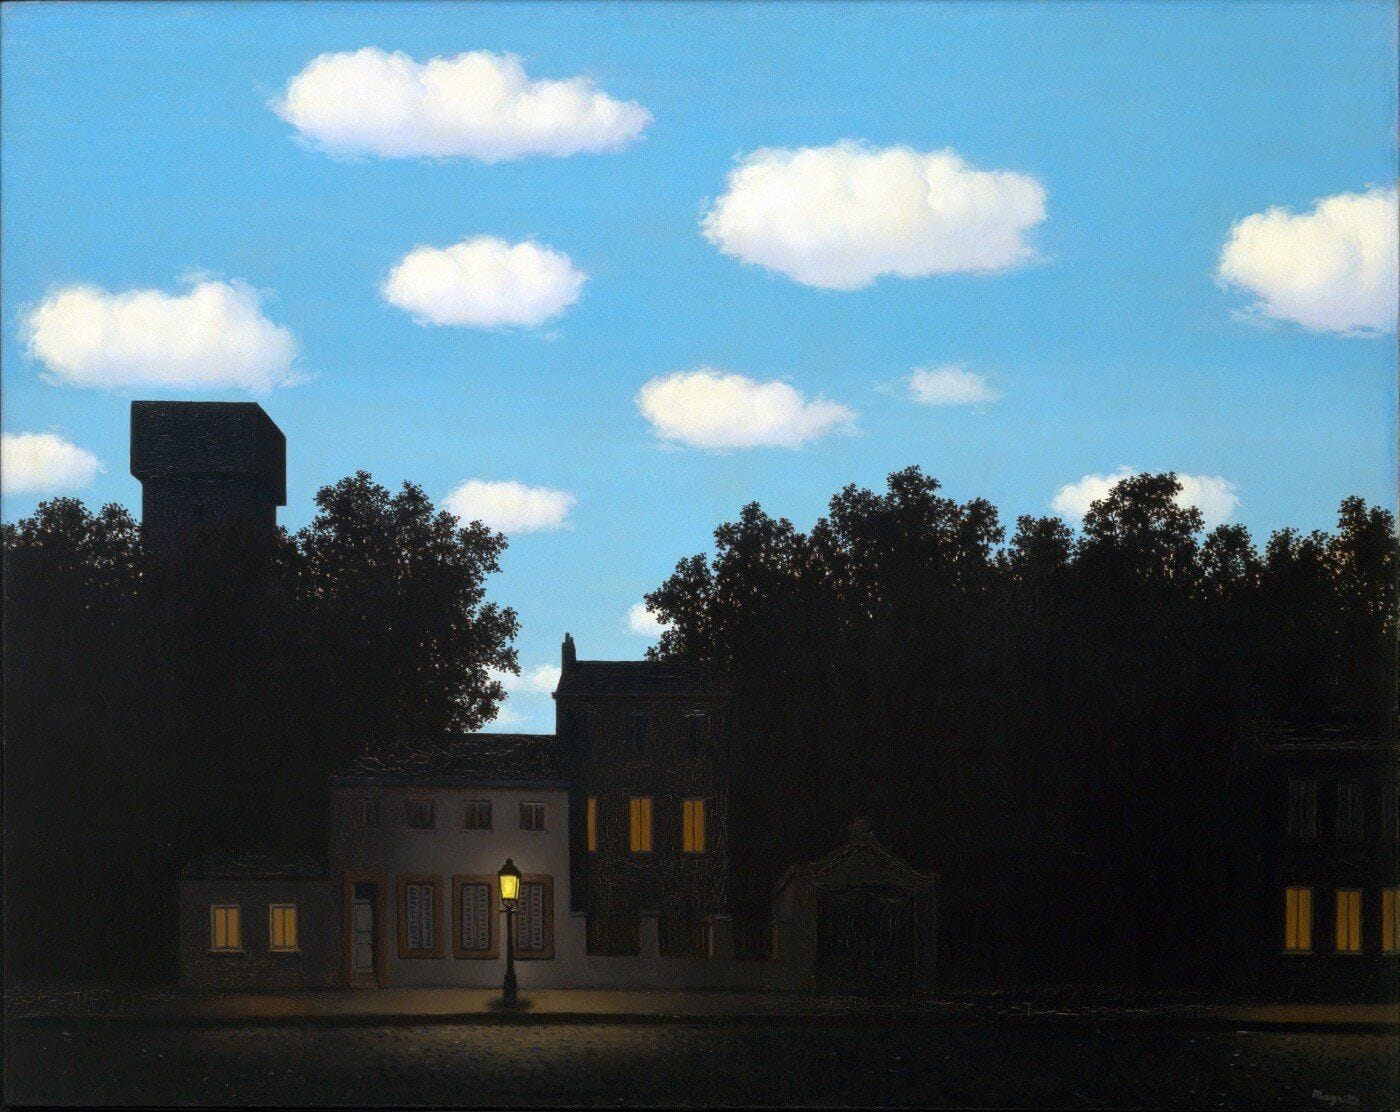 L'Empire des Lumieres (Empire of the Lights) - Version 2 | Magritte  paintings, Rene magritte, Magritte art